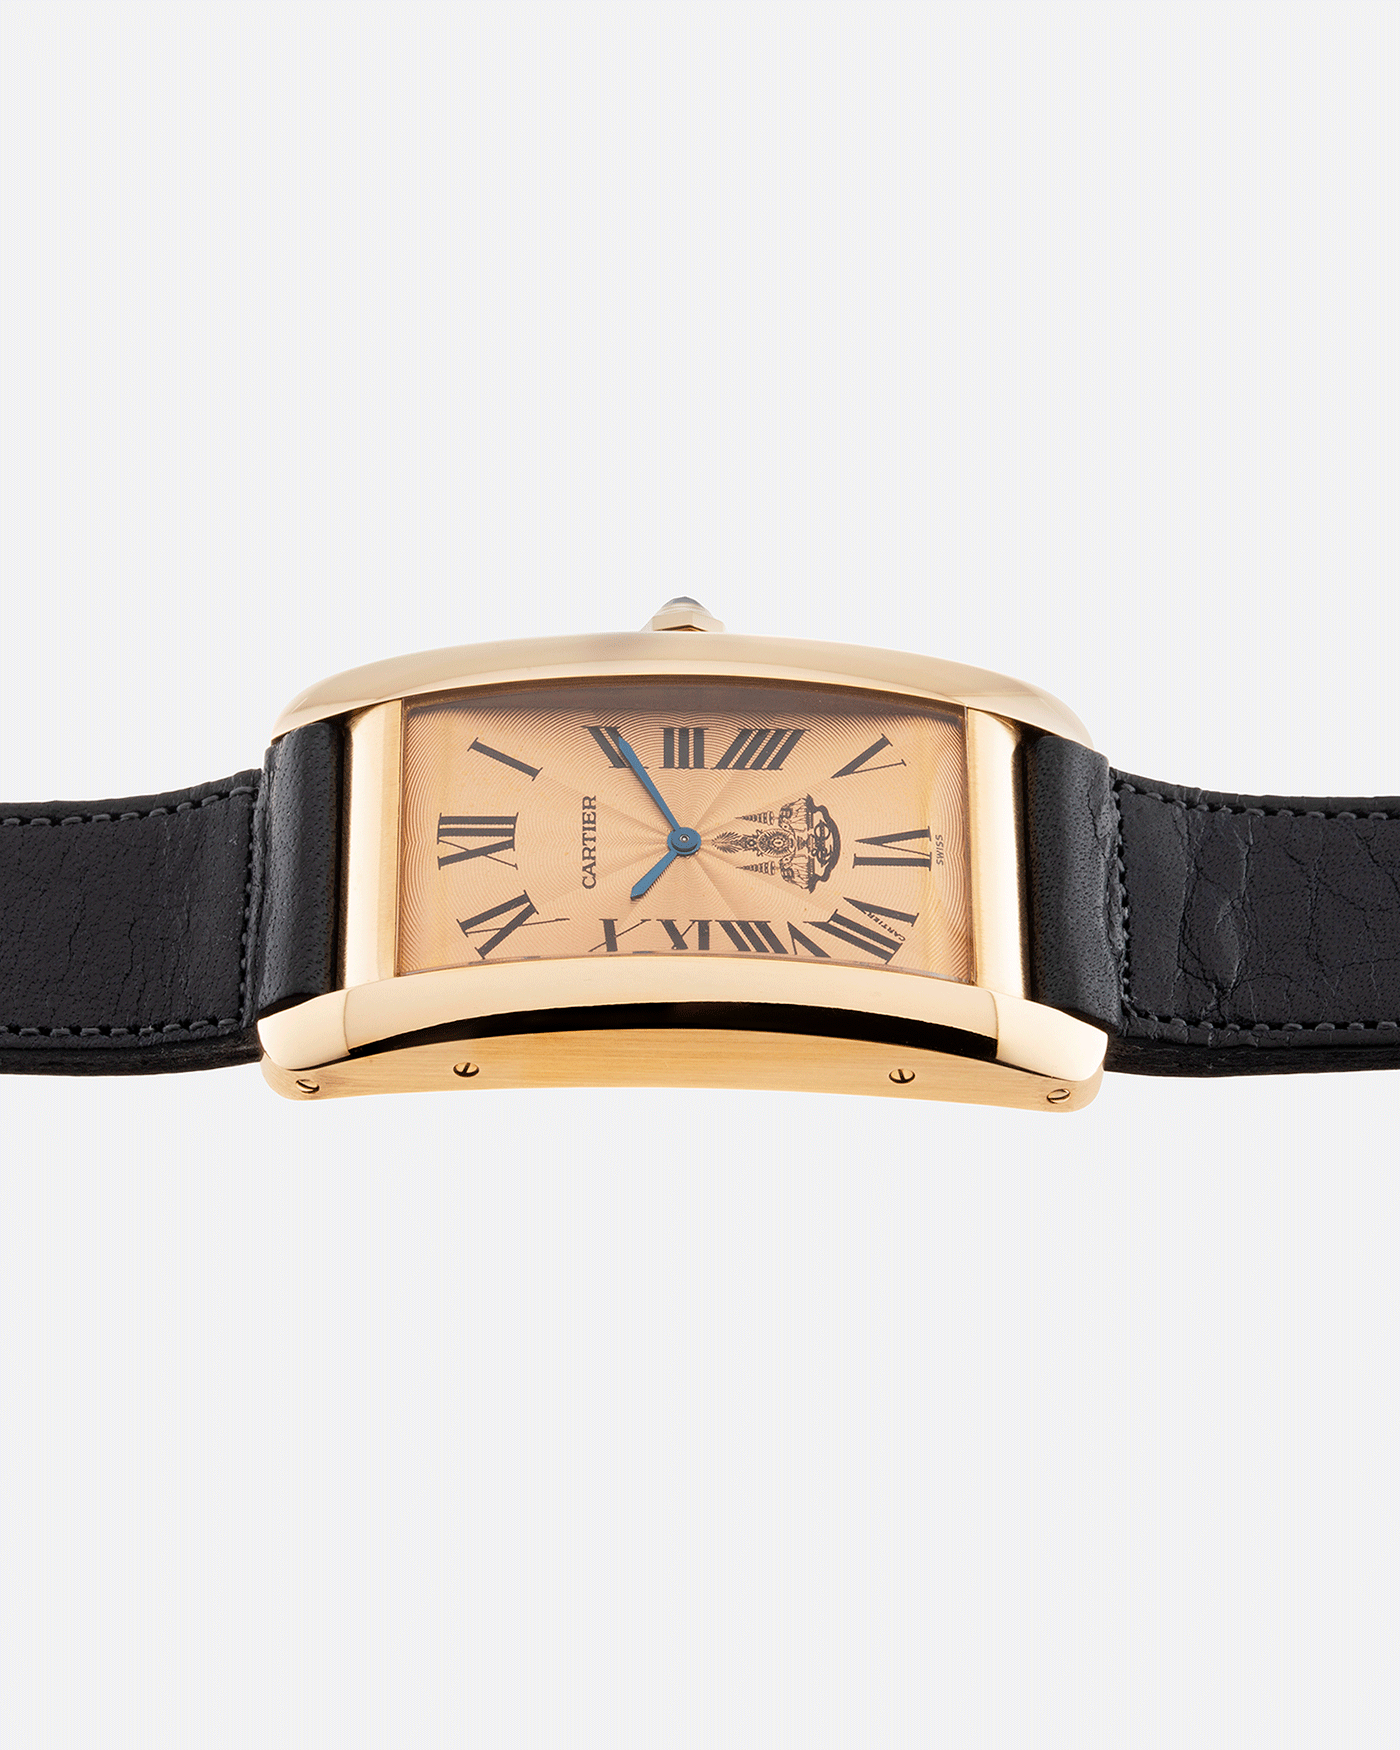 Brand: Cartier Year: 1996 Model: Tank Americaine ‘Thai King’ Reference: 1735 Material: 18k Yellow Gold Movement: Cartier Caliber 430 MC Case Diameter: 45mm X26mm Strap: Navy Blue Accurate Form Calf Strap with separate 18k Cartier Yellow Gold Deployant